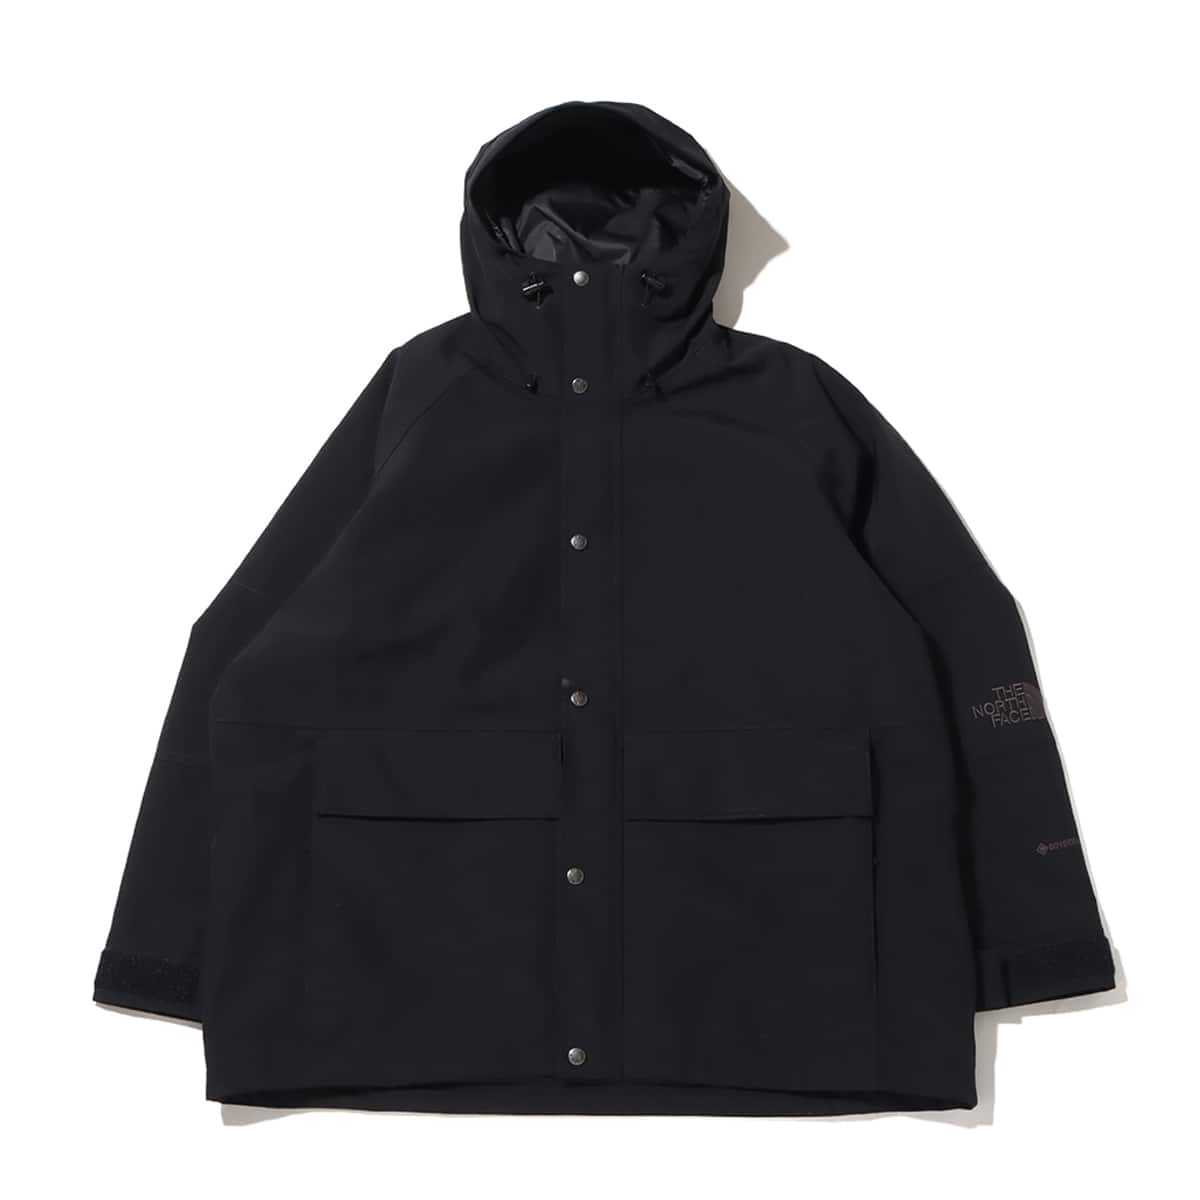 THE NORTH FACE COMPILATION JACKET BLACK 23FW-I